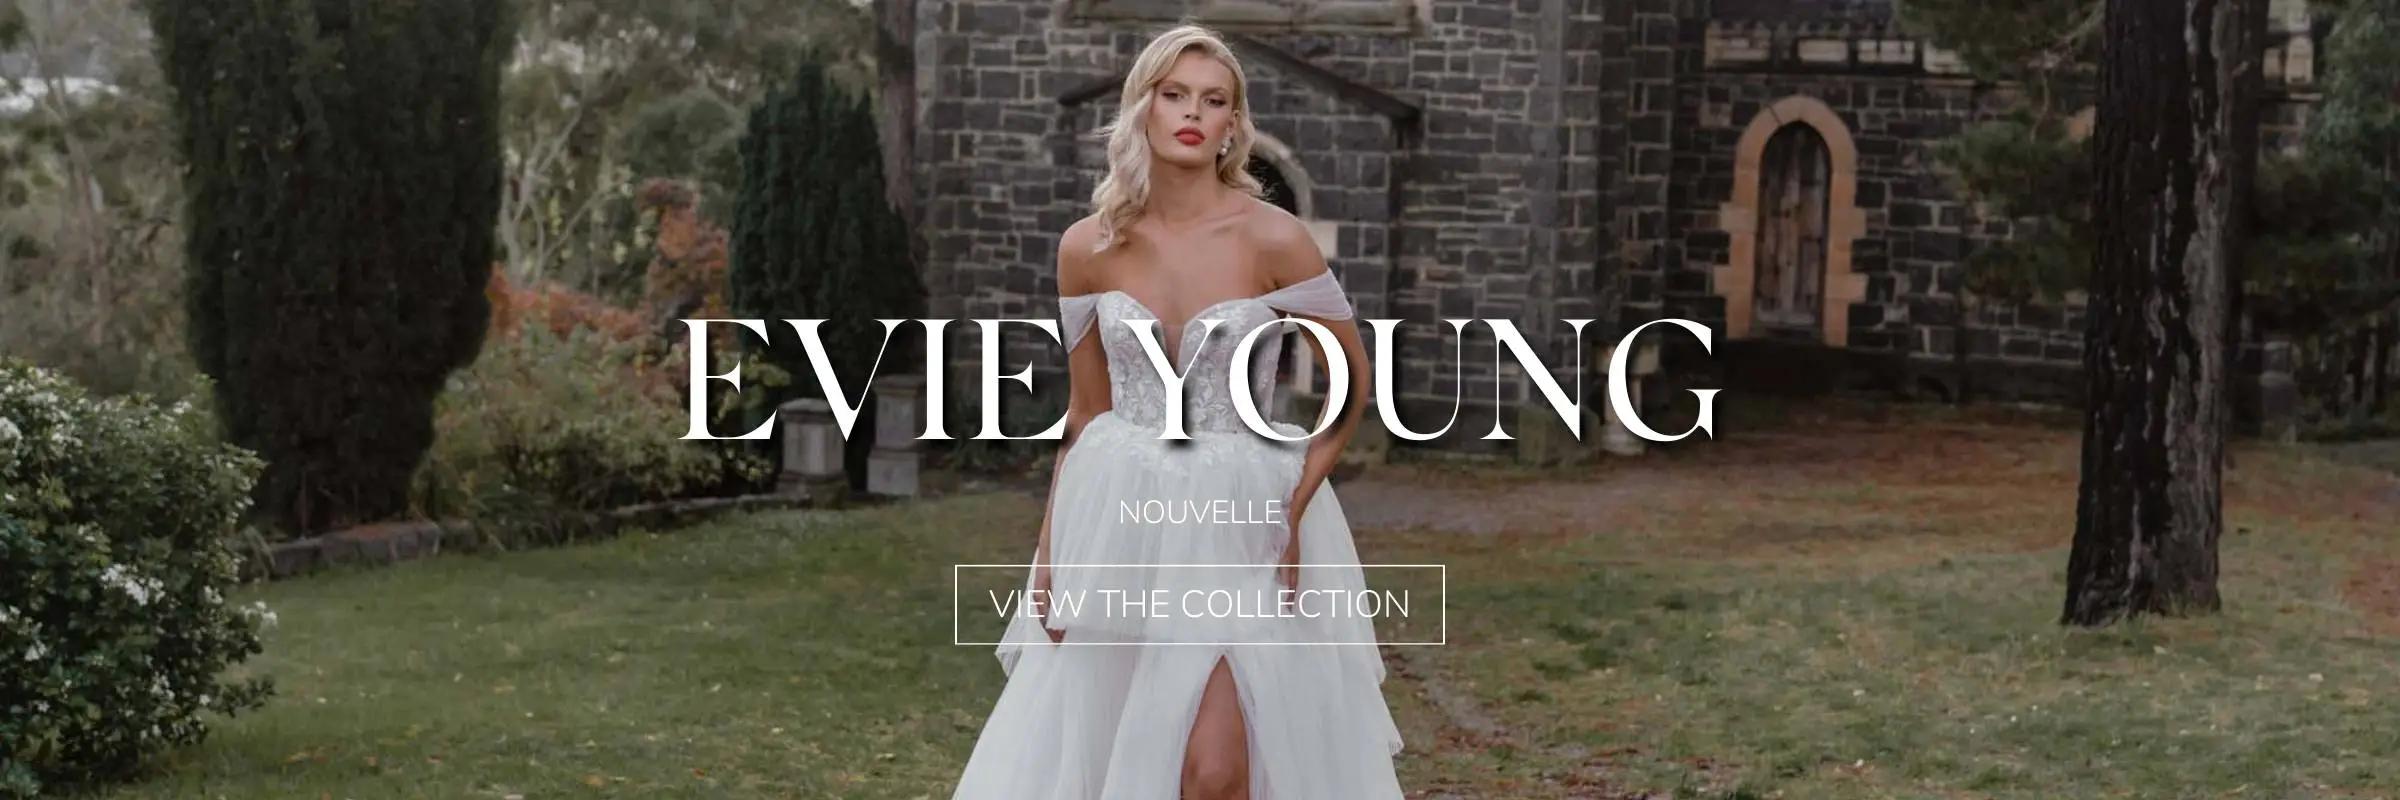 Evie Young bridal gown